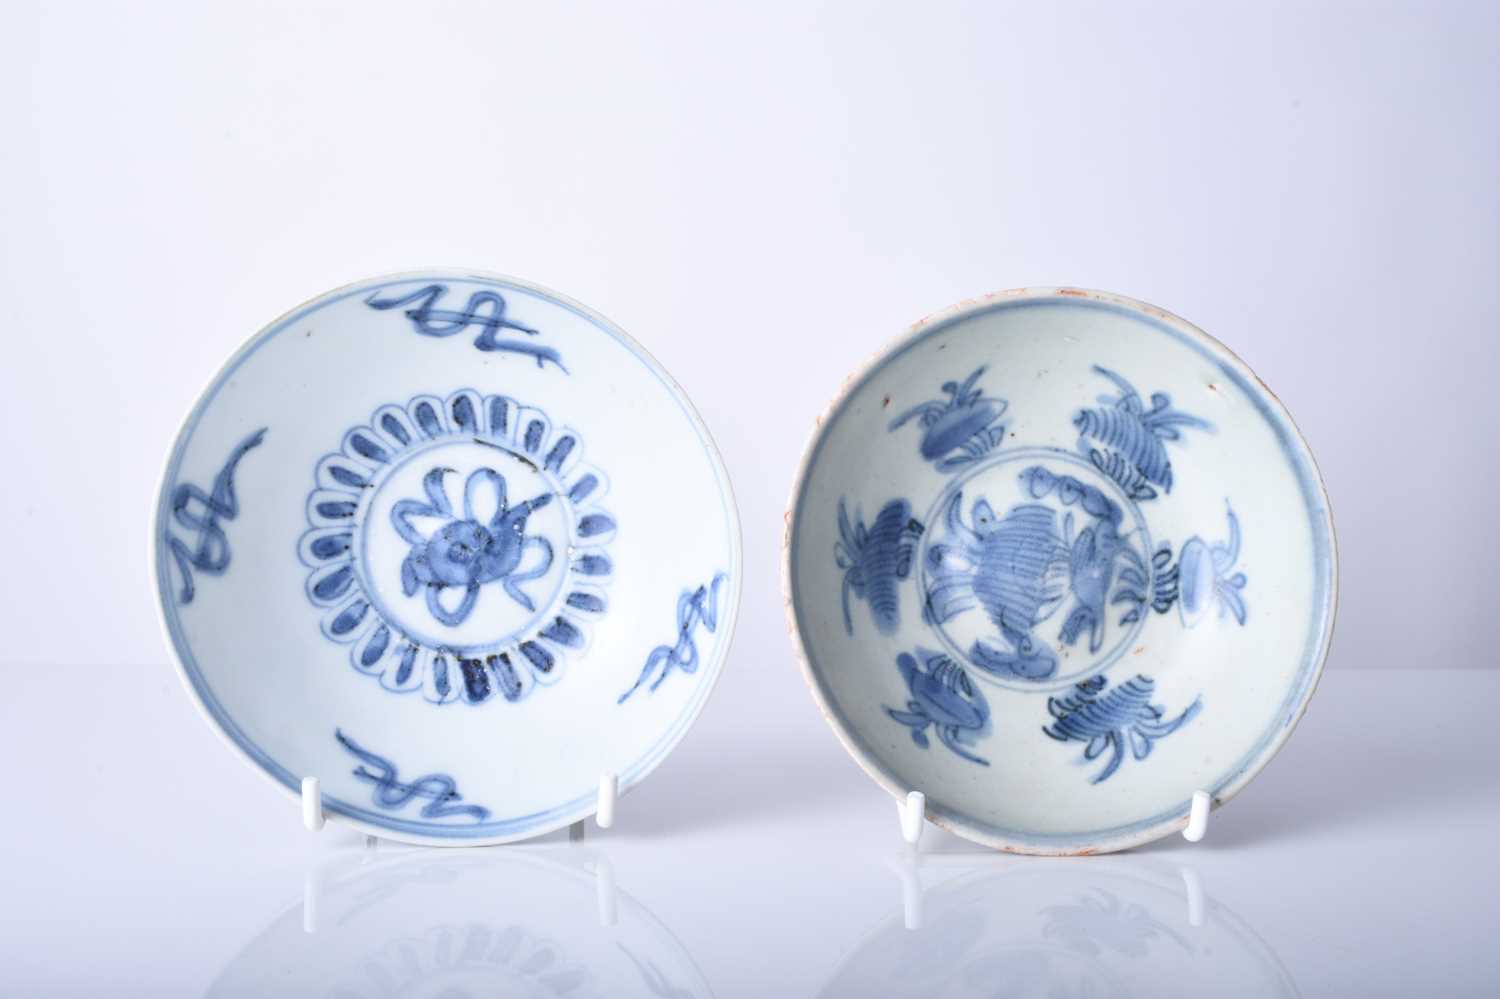 Two Chinese blue and white bowls, Ming Dynasty